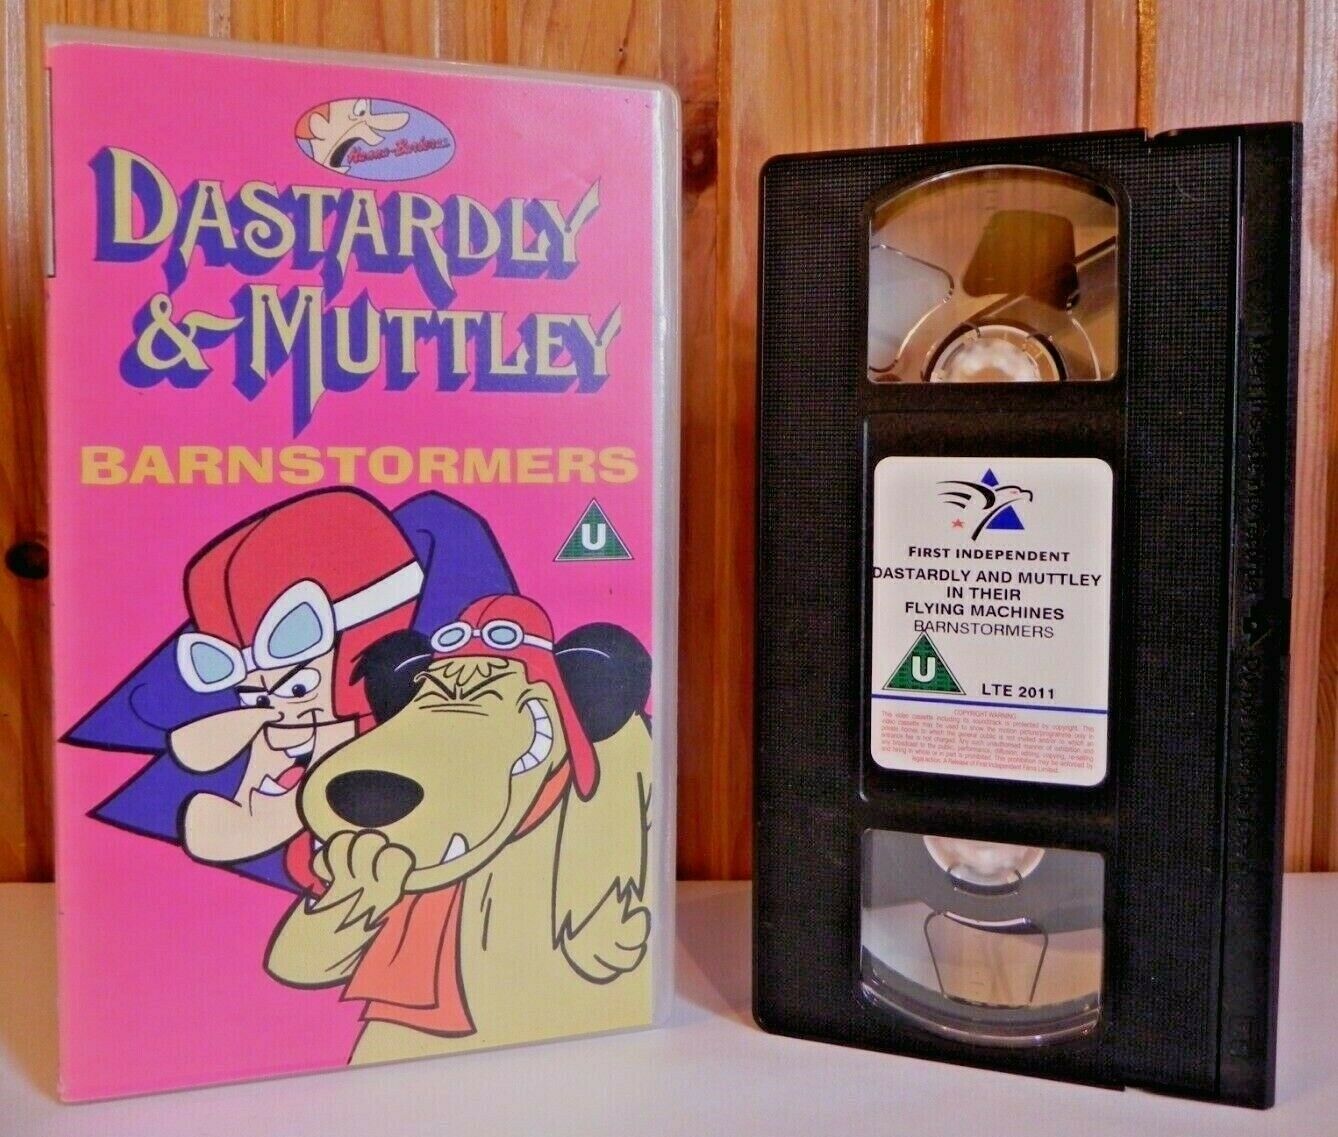 Dastardly And Mutley: Barnstormers - Hanna-Barbera - Animated - Children's - VHS-